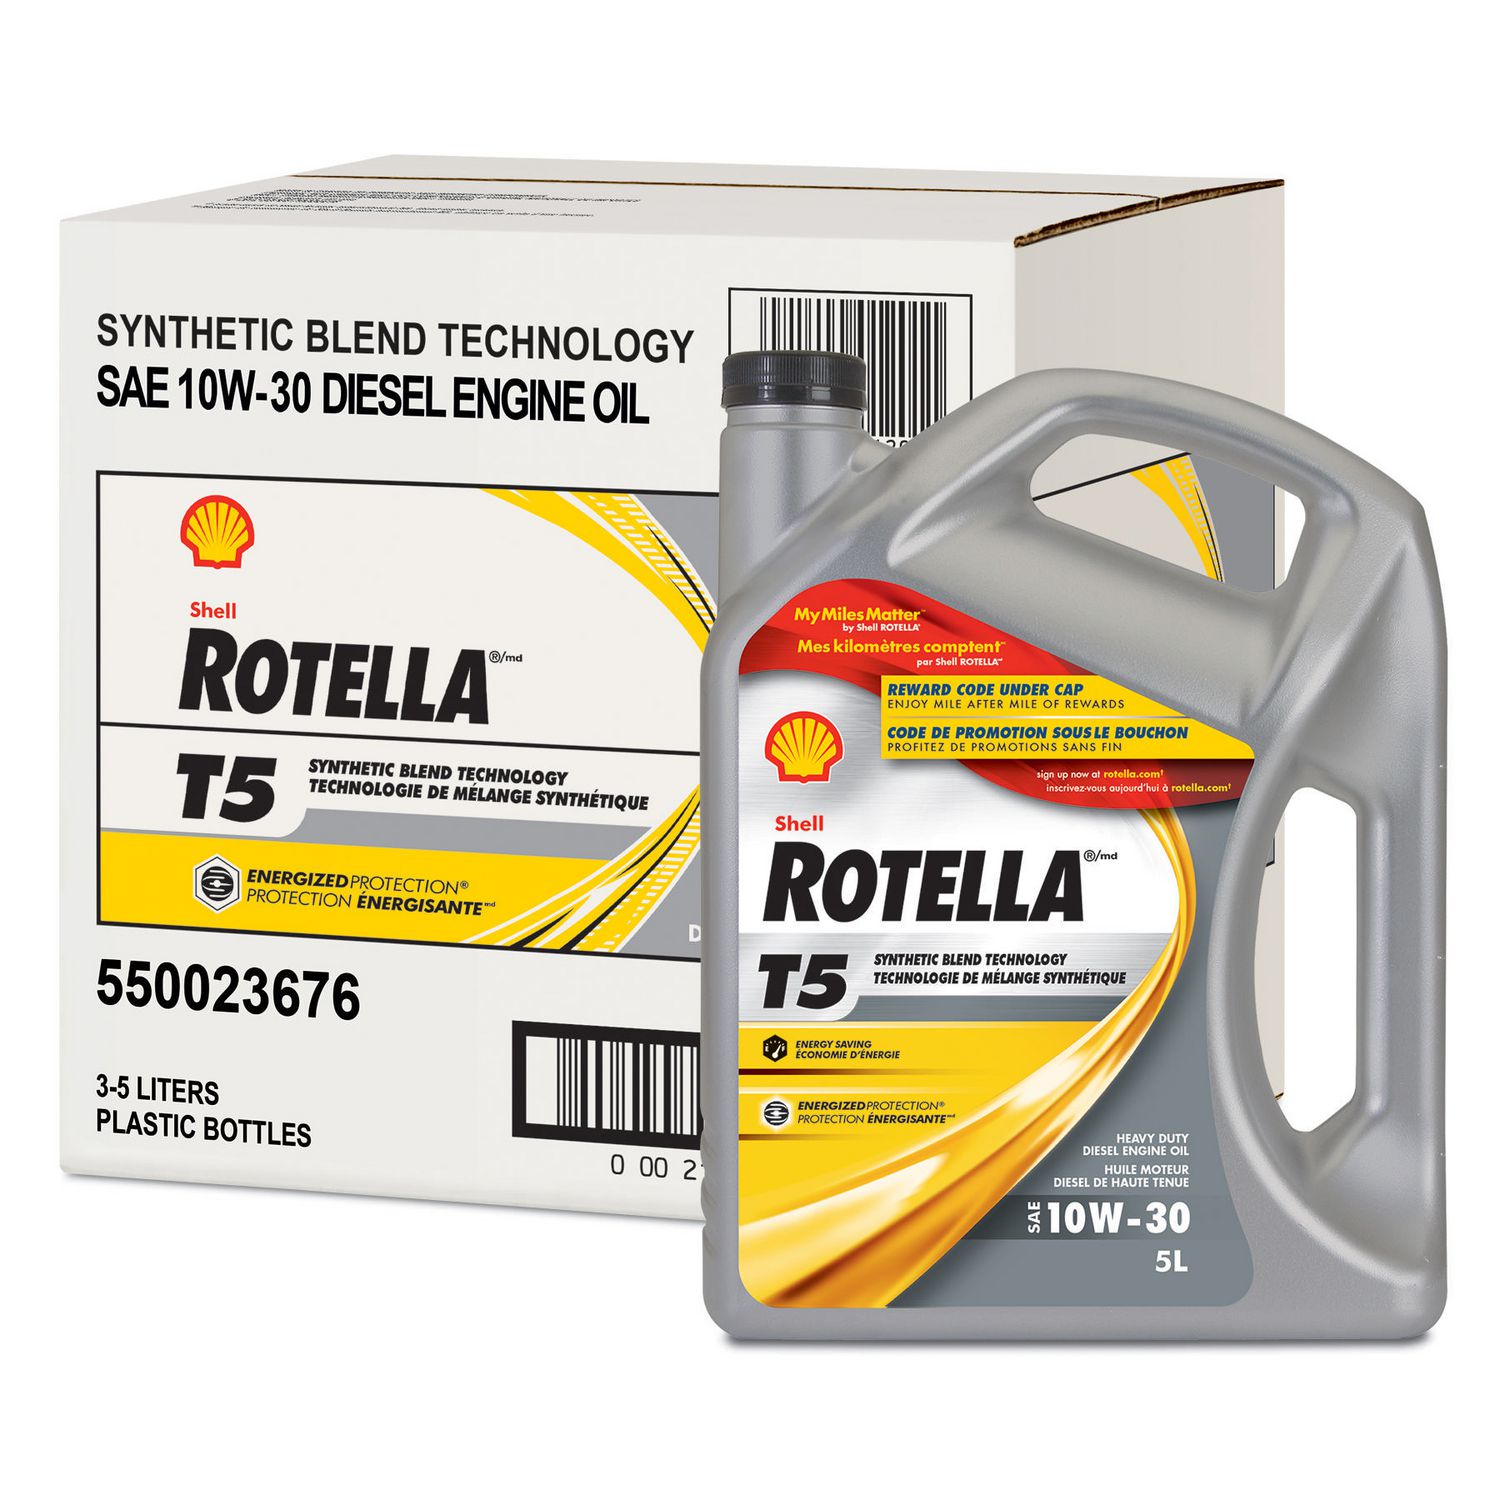 rotella-t5-synthetic-blend-sae-10w-30-diesel-engine-oil-walmart-canada